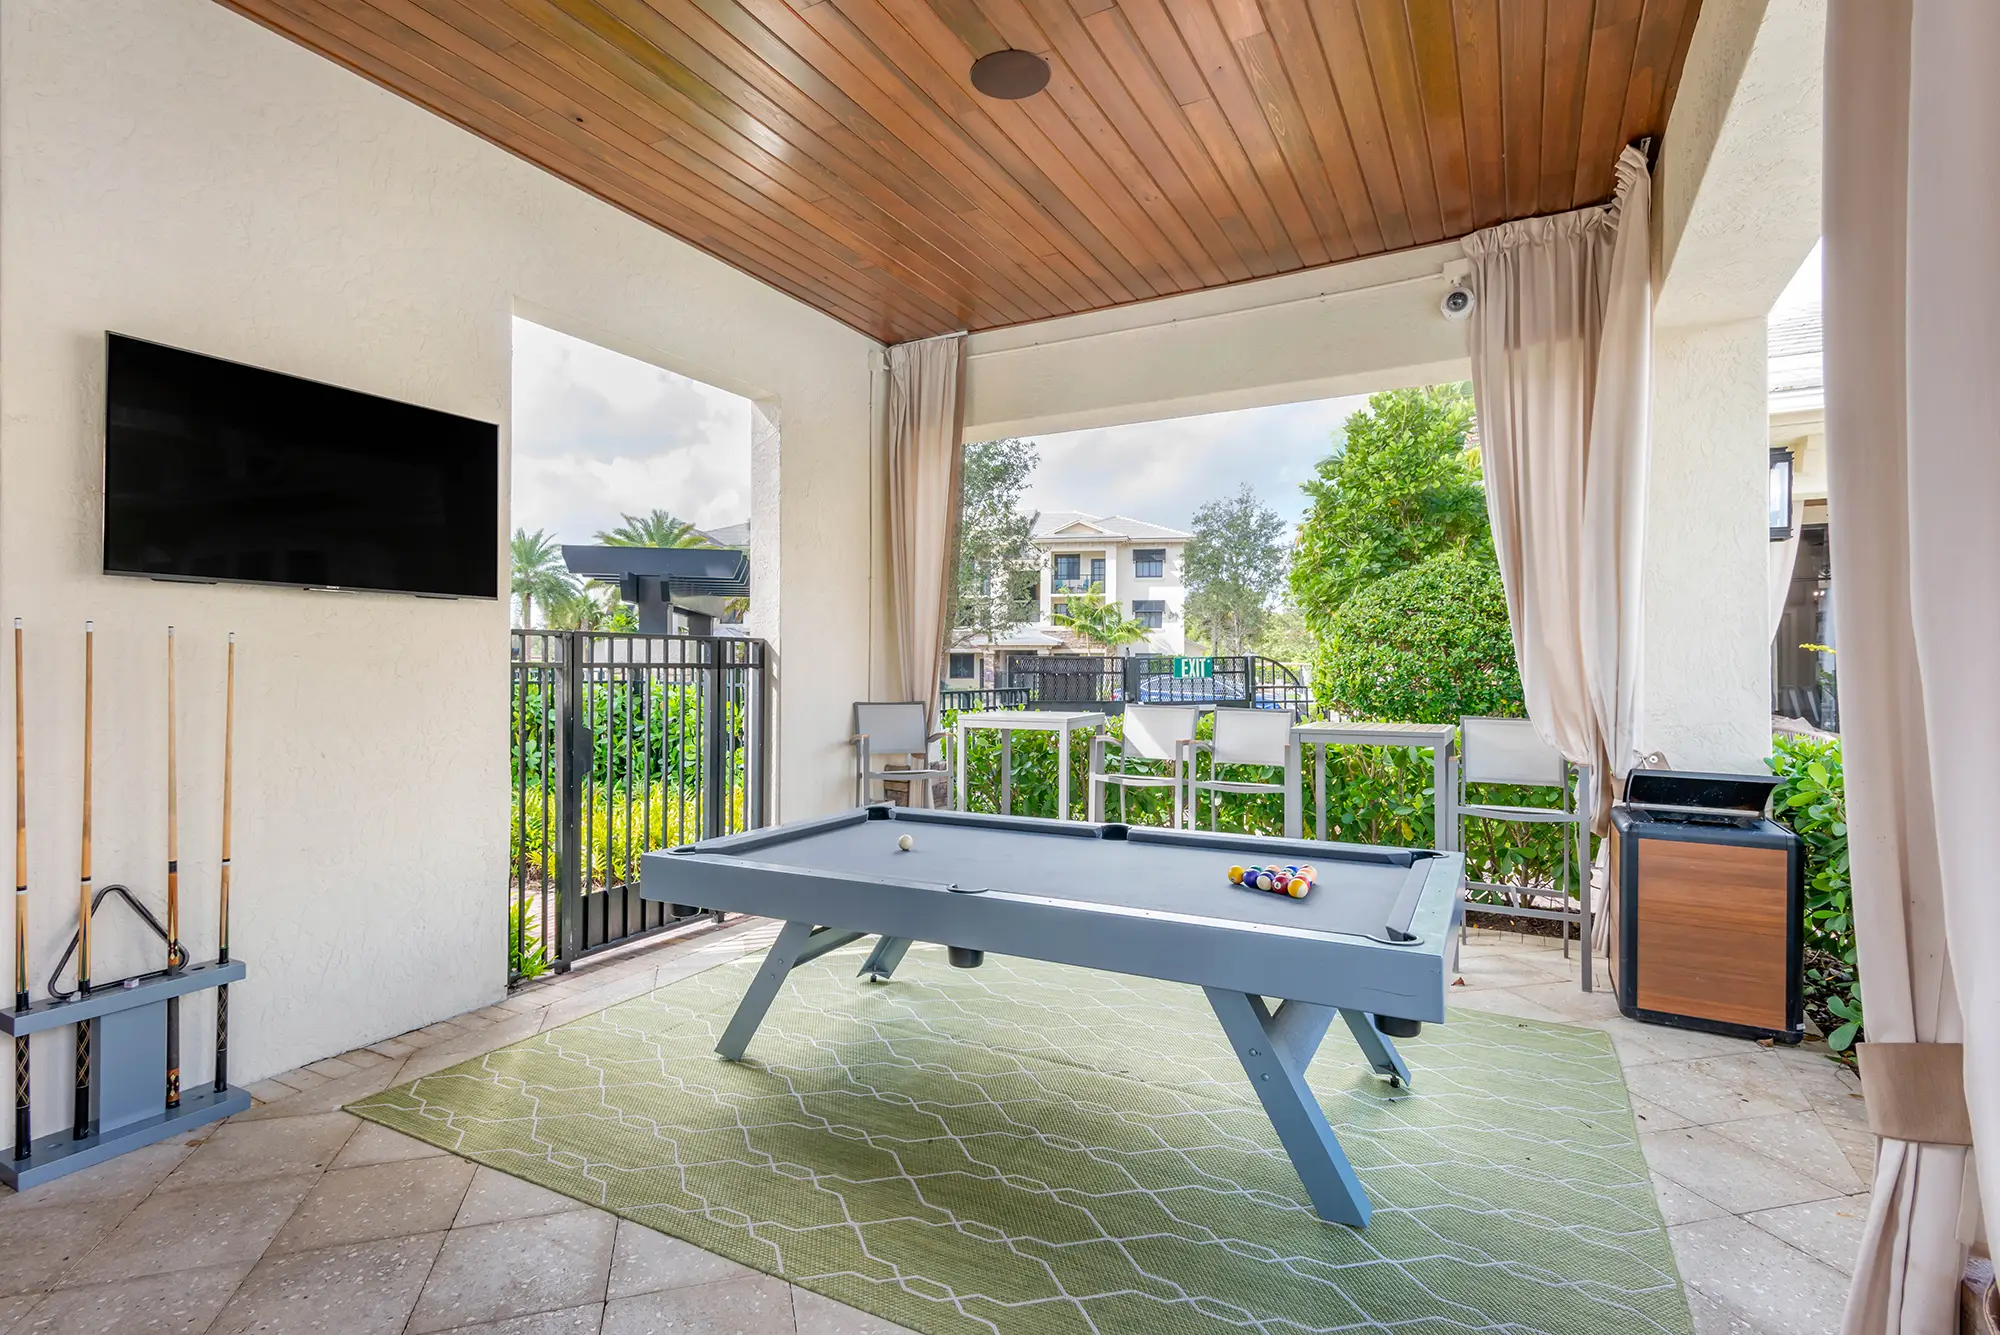 Covered patio with pool table and tv.